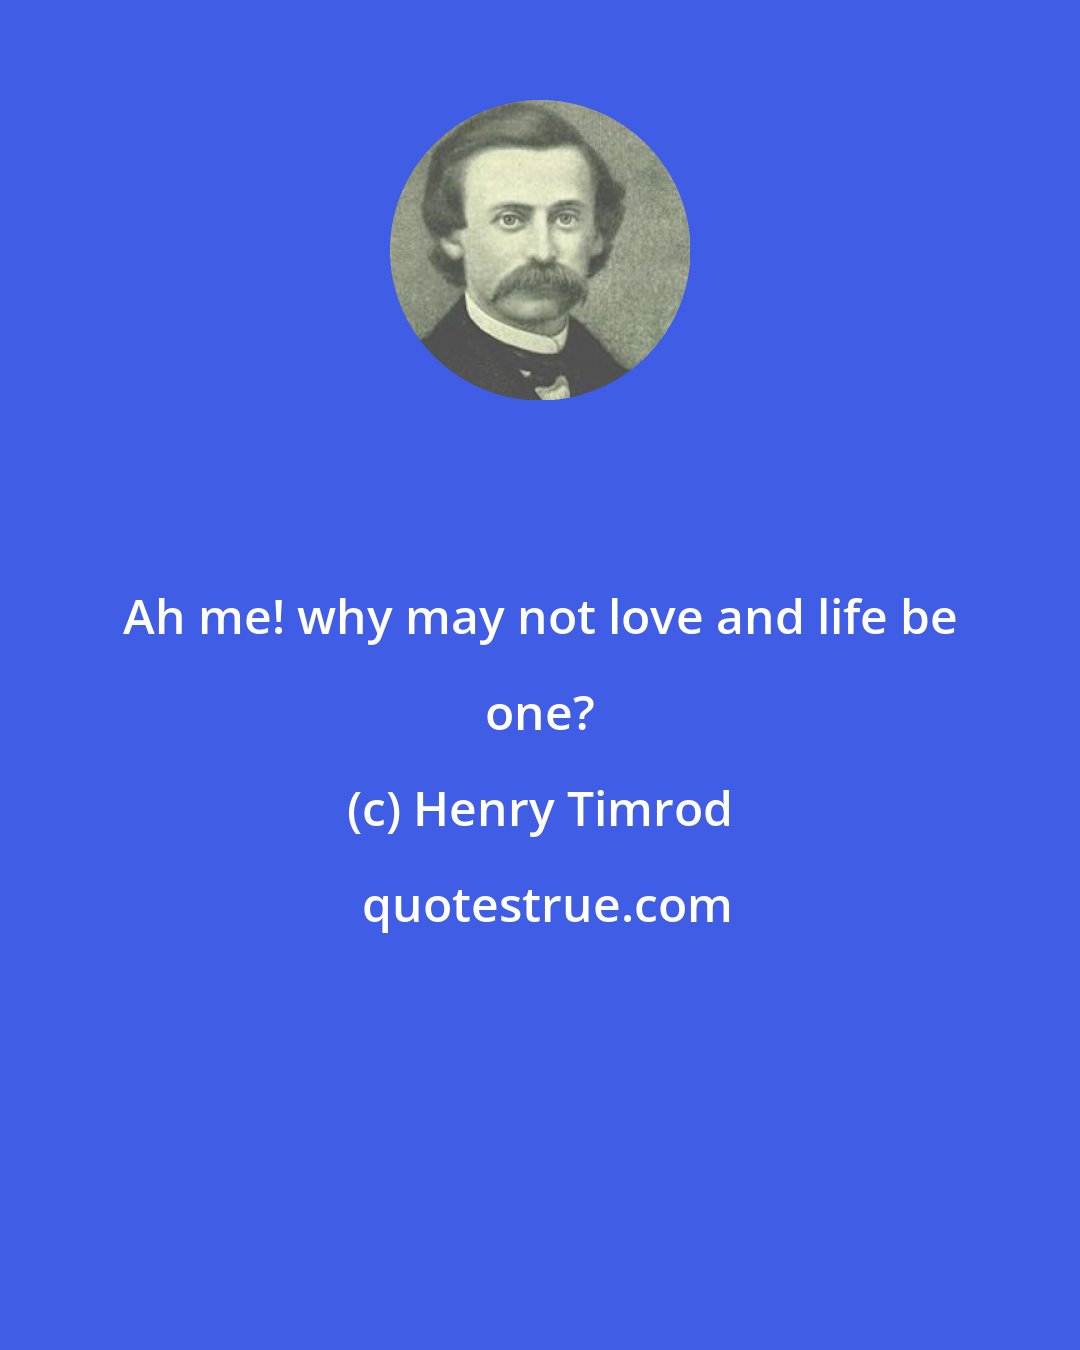 Henry Timrod: Ah me! why may not love and life be one?